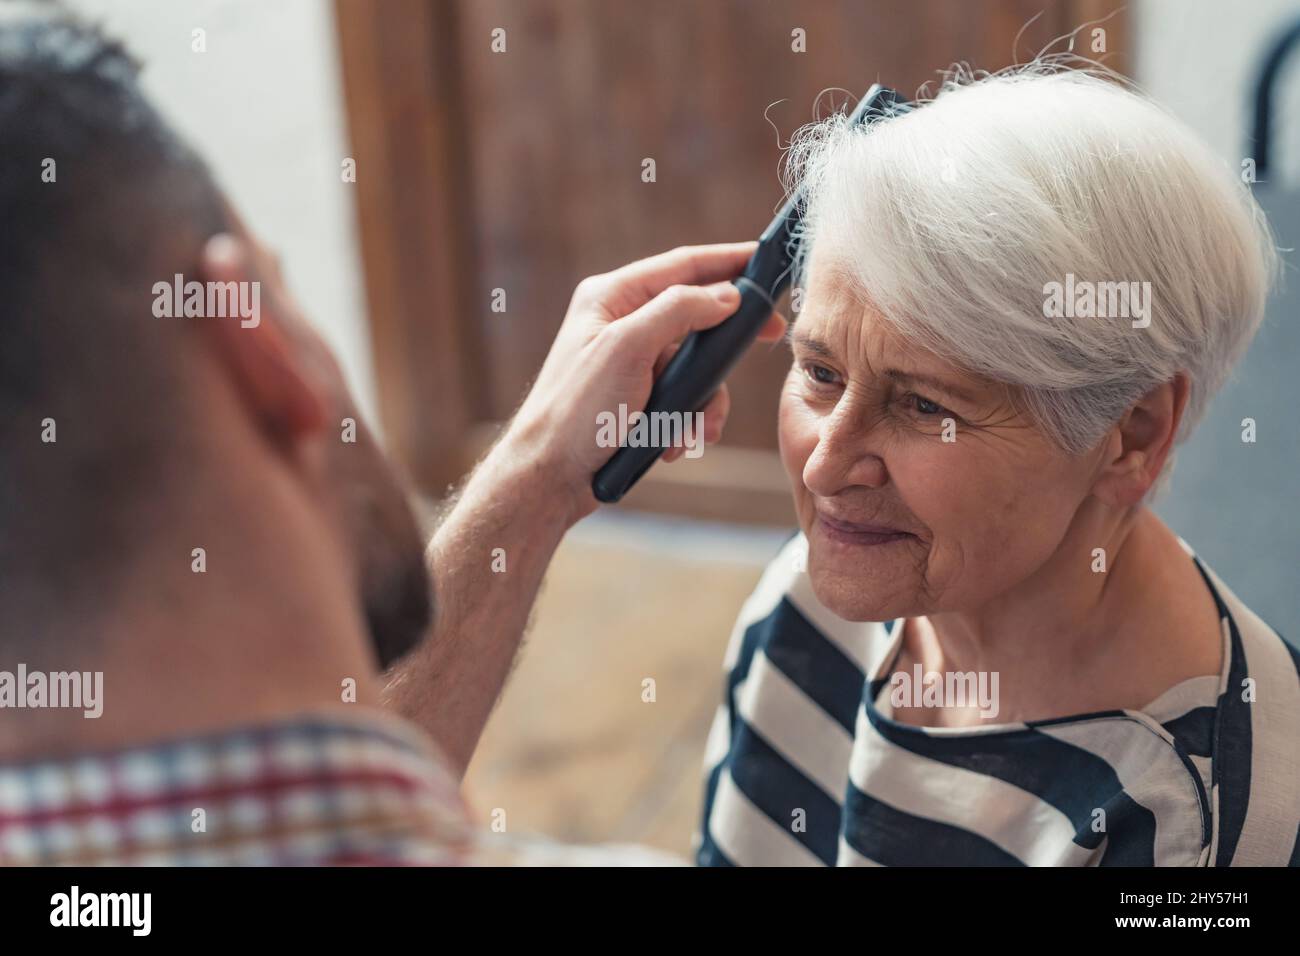 adult caucasian son taking care of his elderly mother by combing her short grey hair. High quality photo Stock Photo